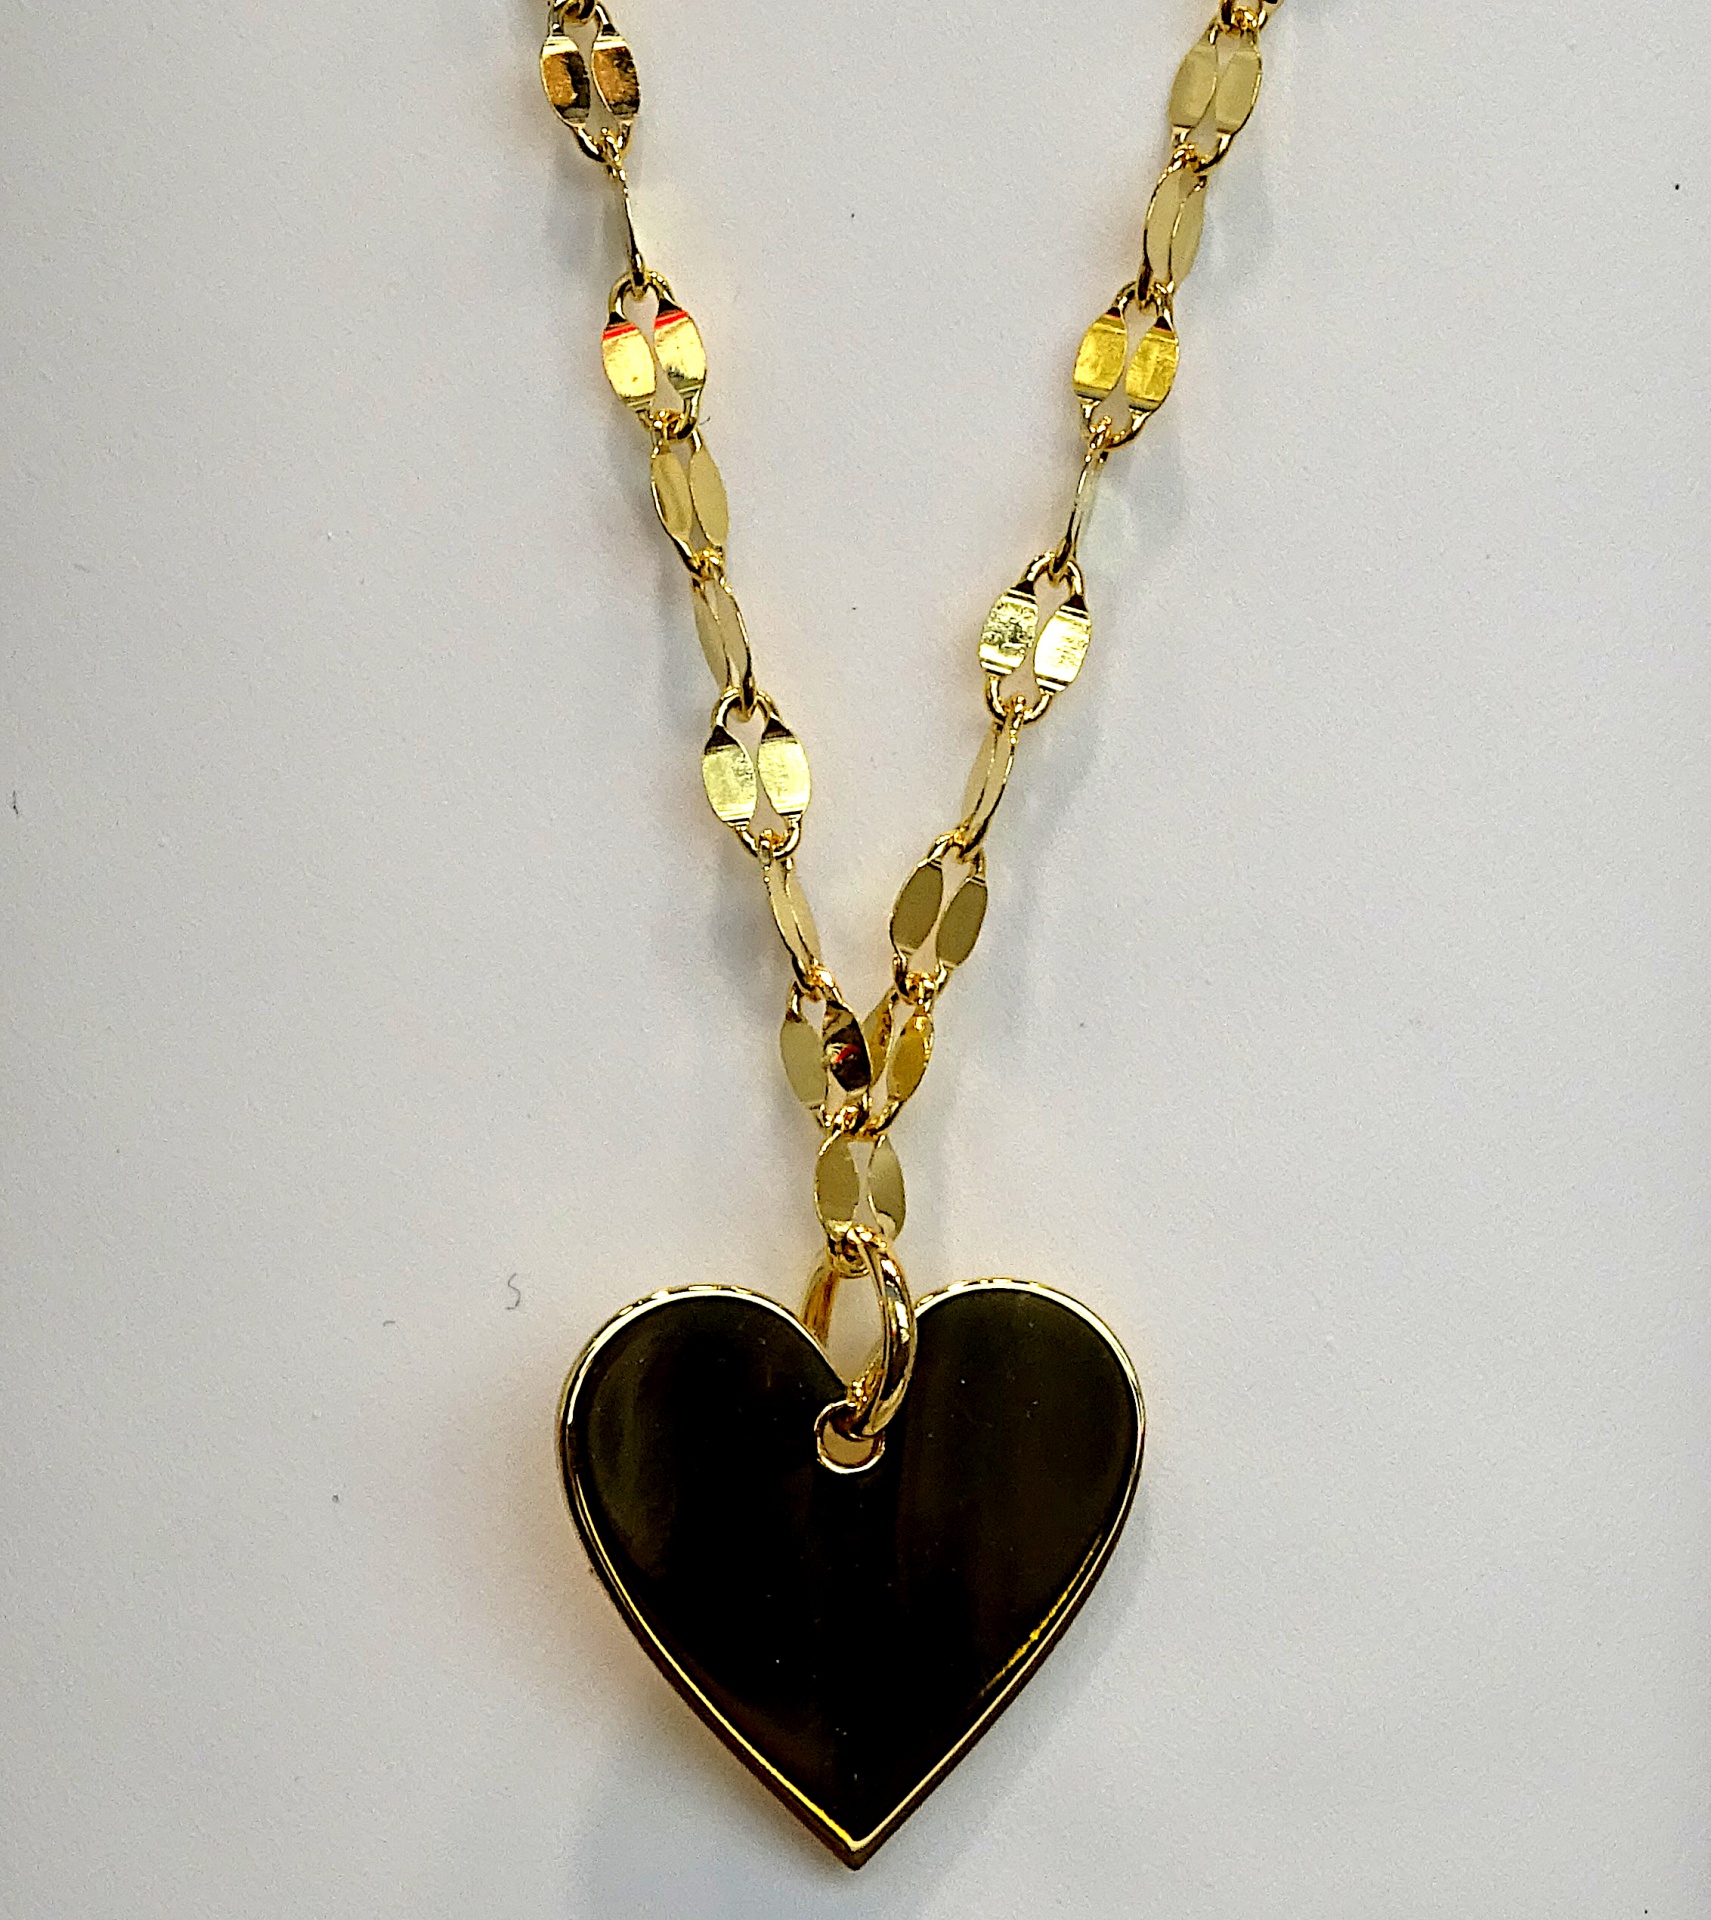 Gold Link And Heart Shaped Pendant Free Stock Photo - Public Domain ...